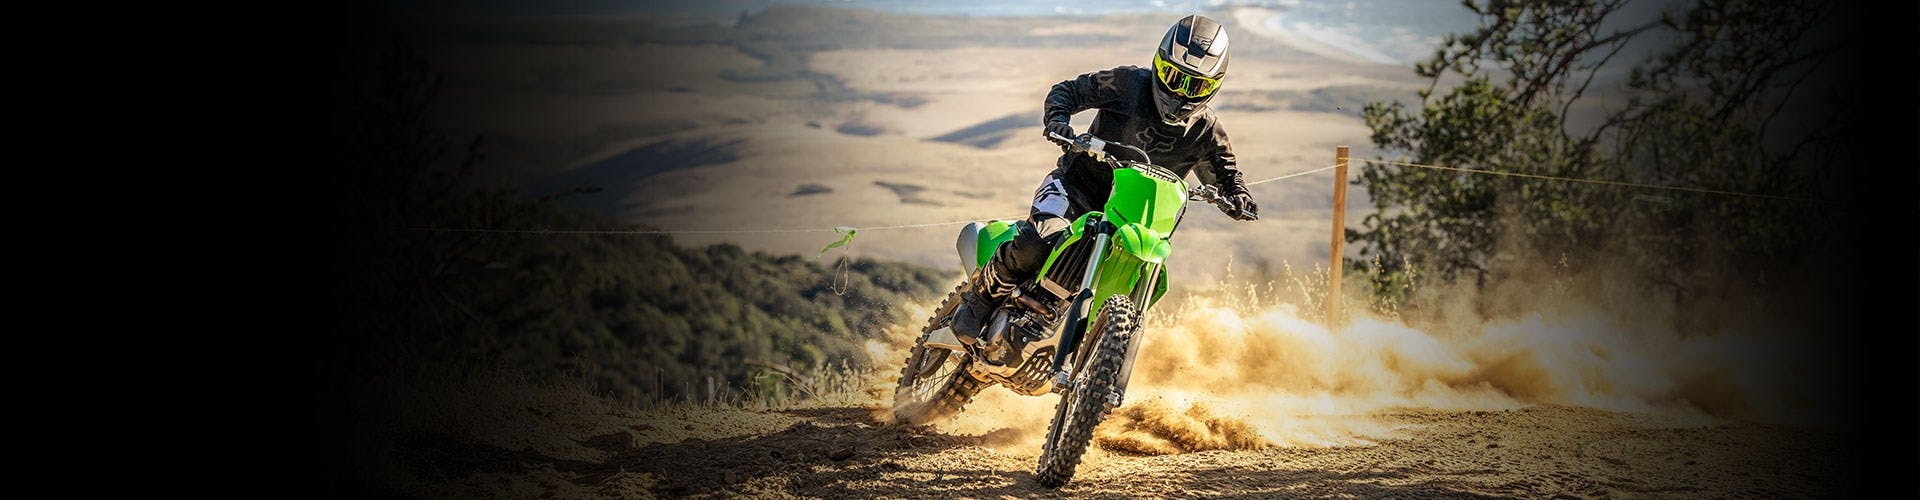 Kawasaki KX250X in lime green colour on off road track